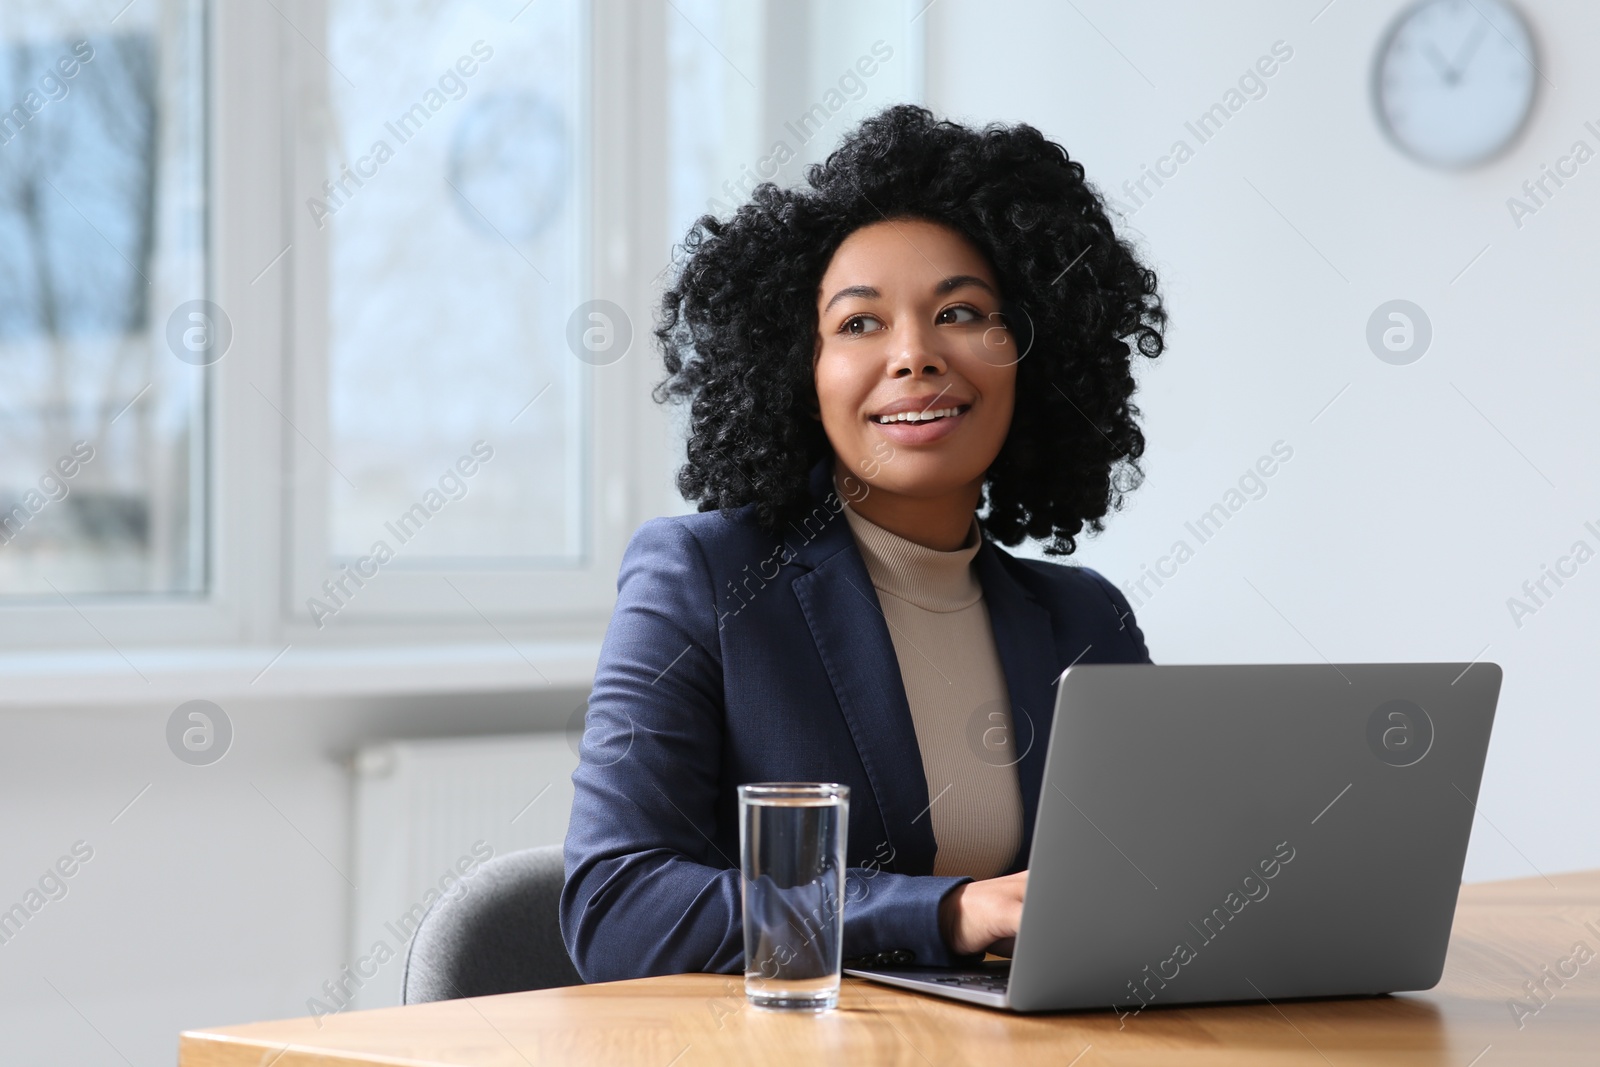 Photo of Young woman working on laptop at table in office